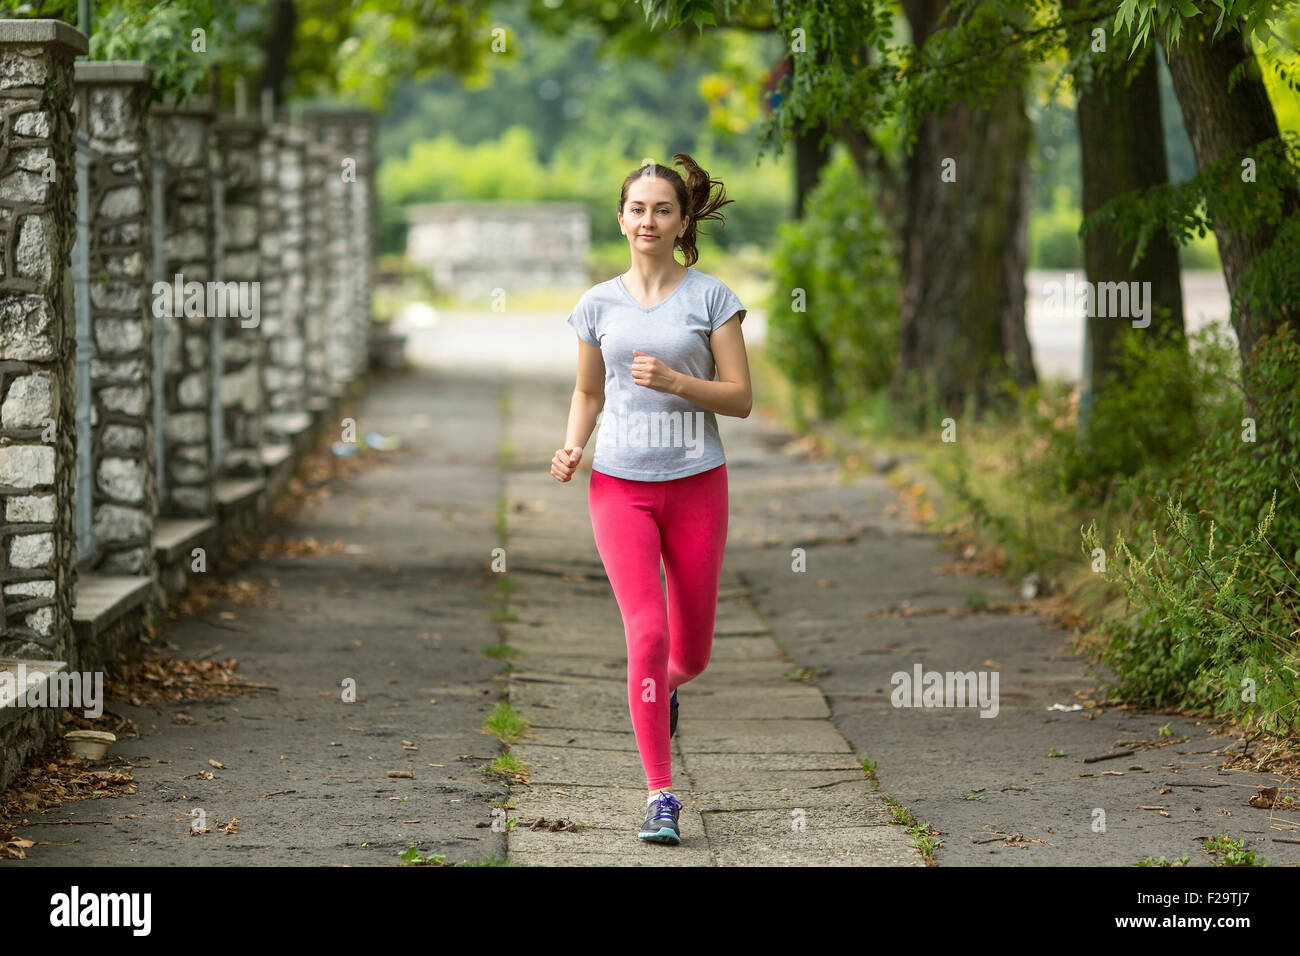 Running. Young woman Jogging in the Park. Morning jog. Healthy lifestyle. Stock Photo